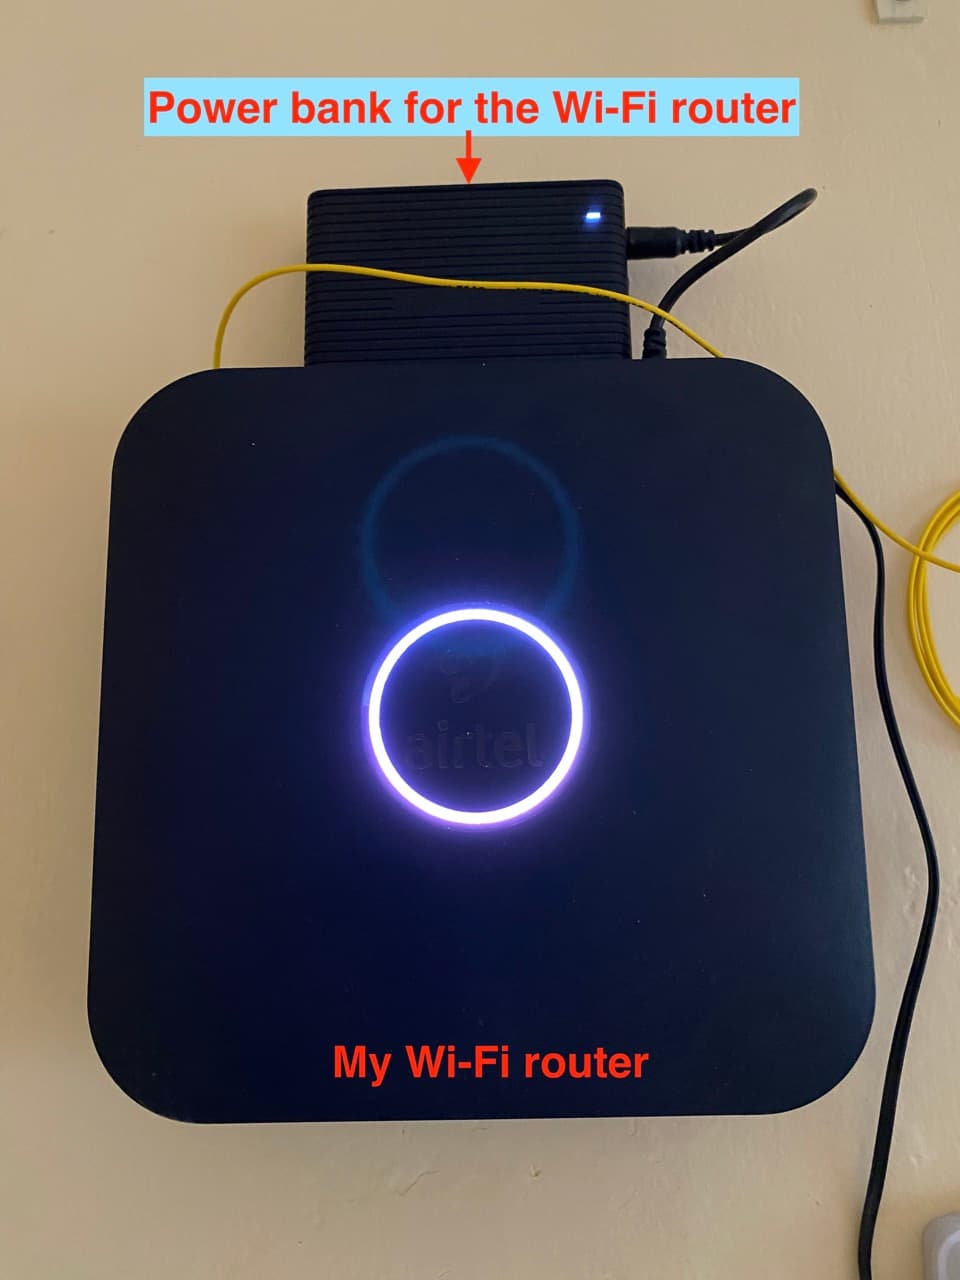 Wi-Fi router with power bank connected to it